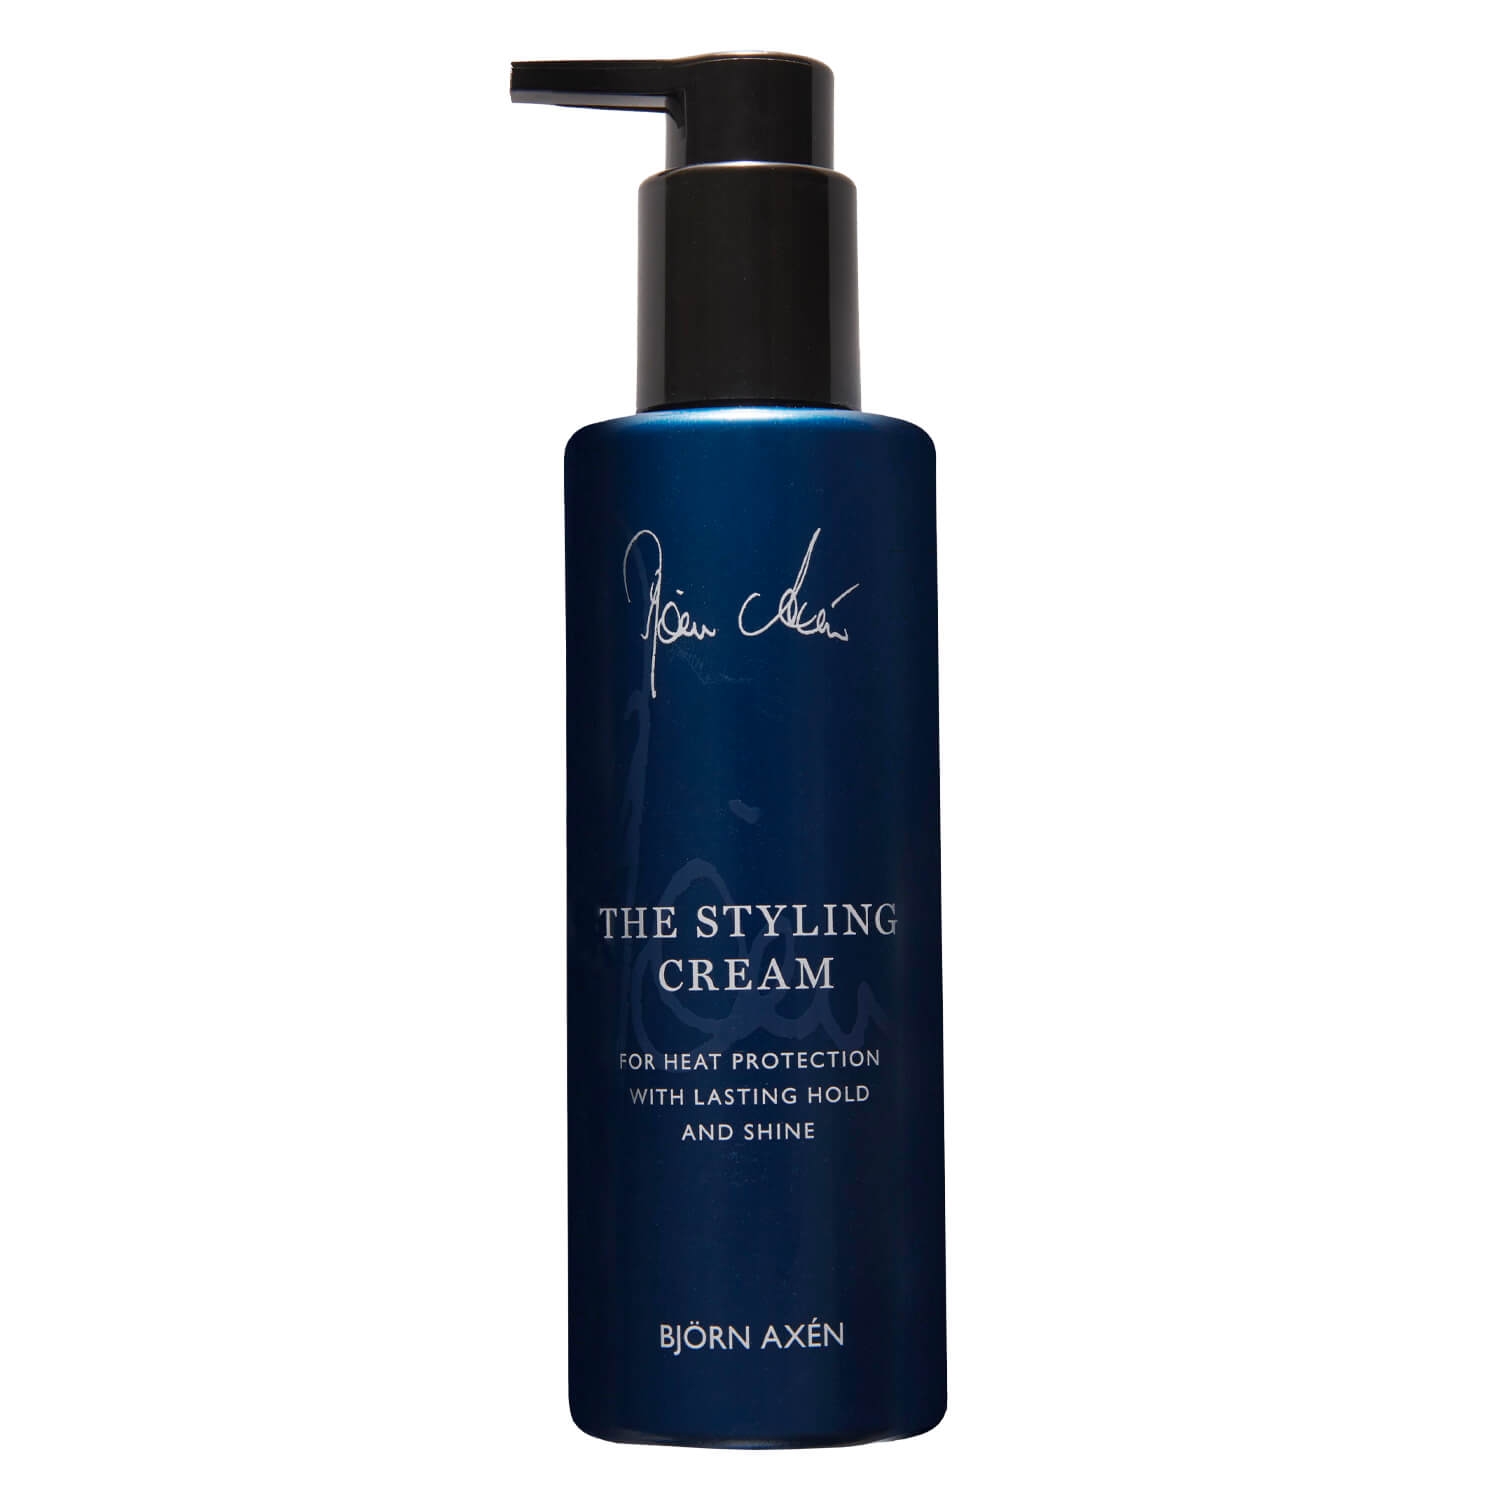 Product image from Björn Axén Signature - The Styling Cream